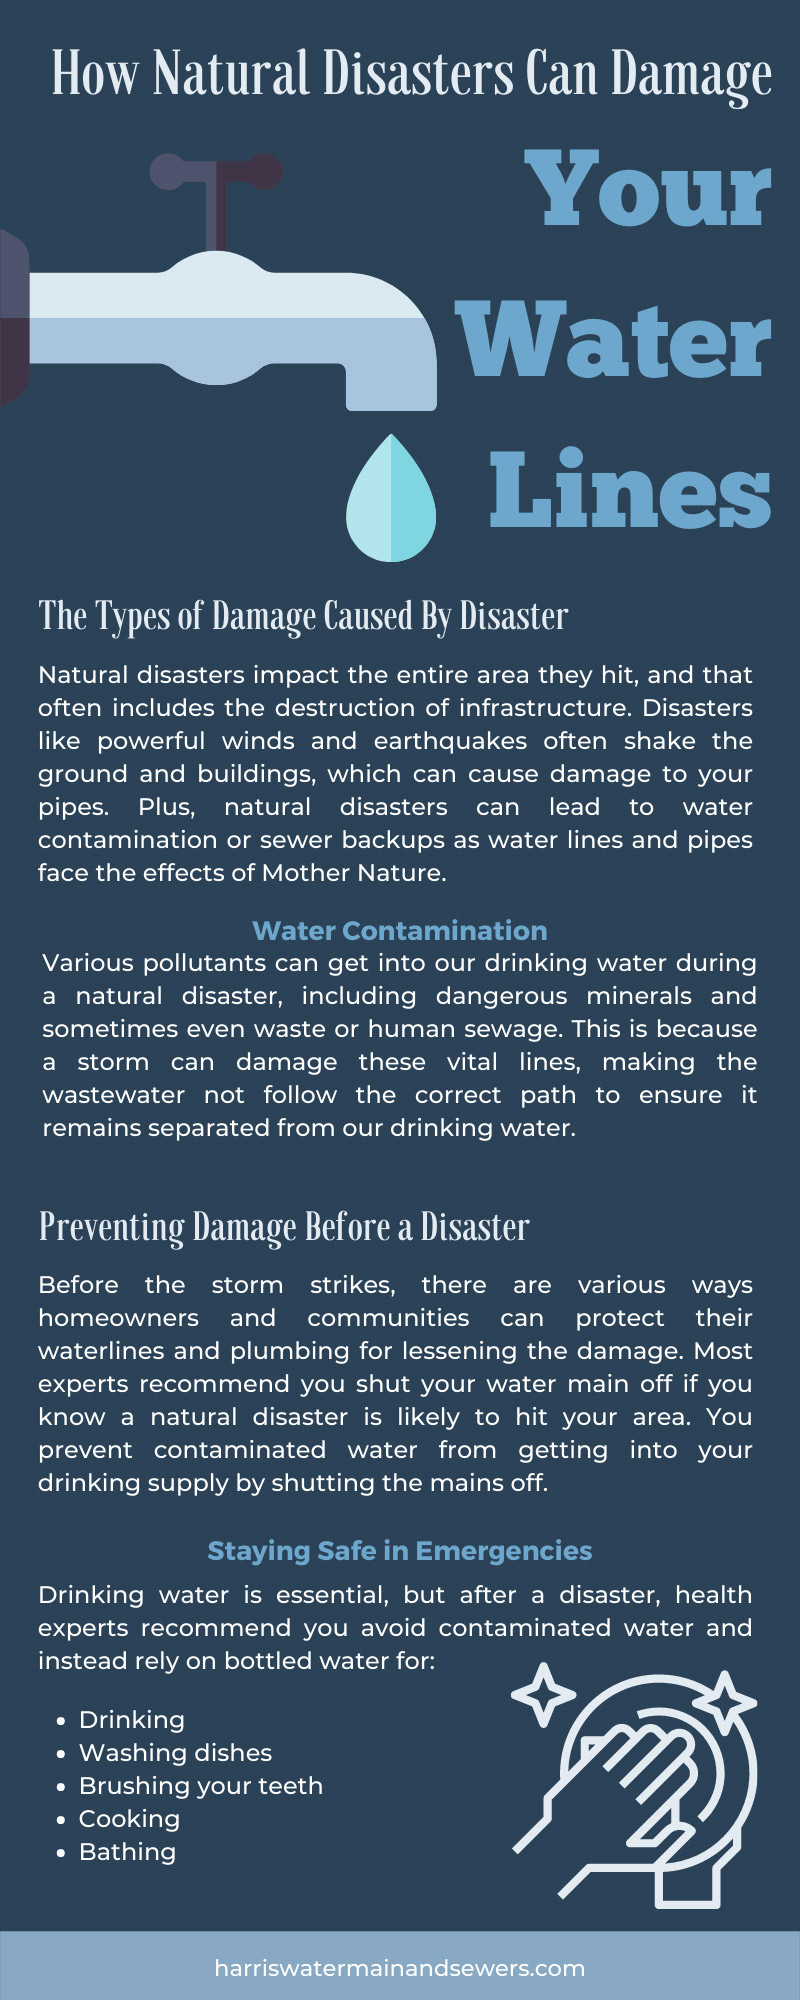 How Natural Disasters Can Damage Your Water Lines